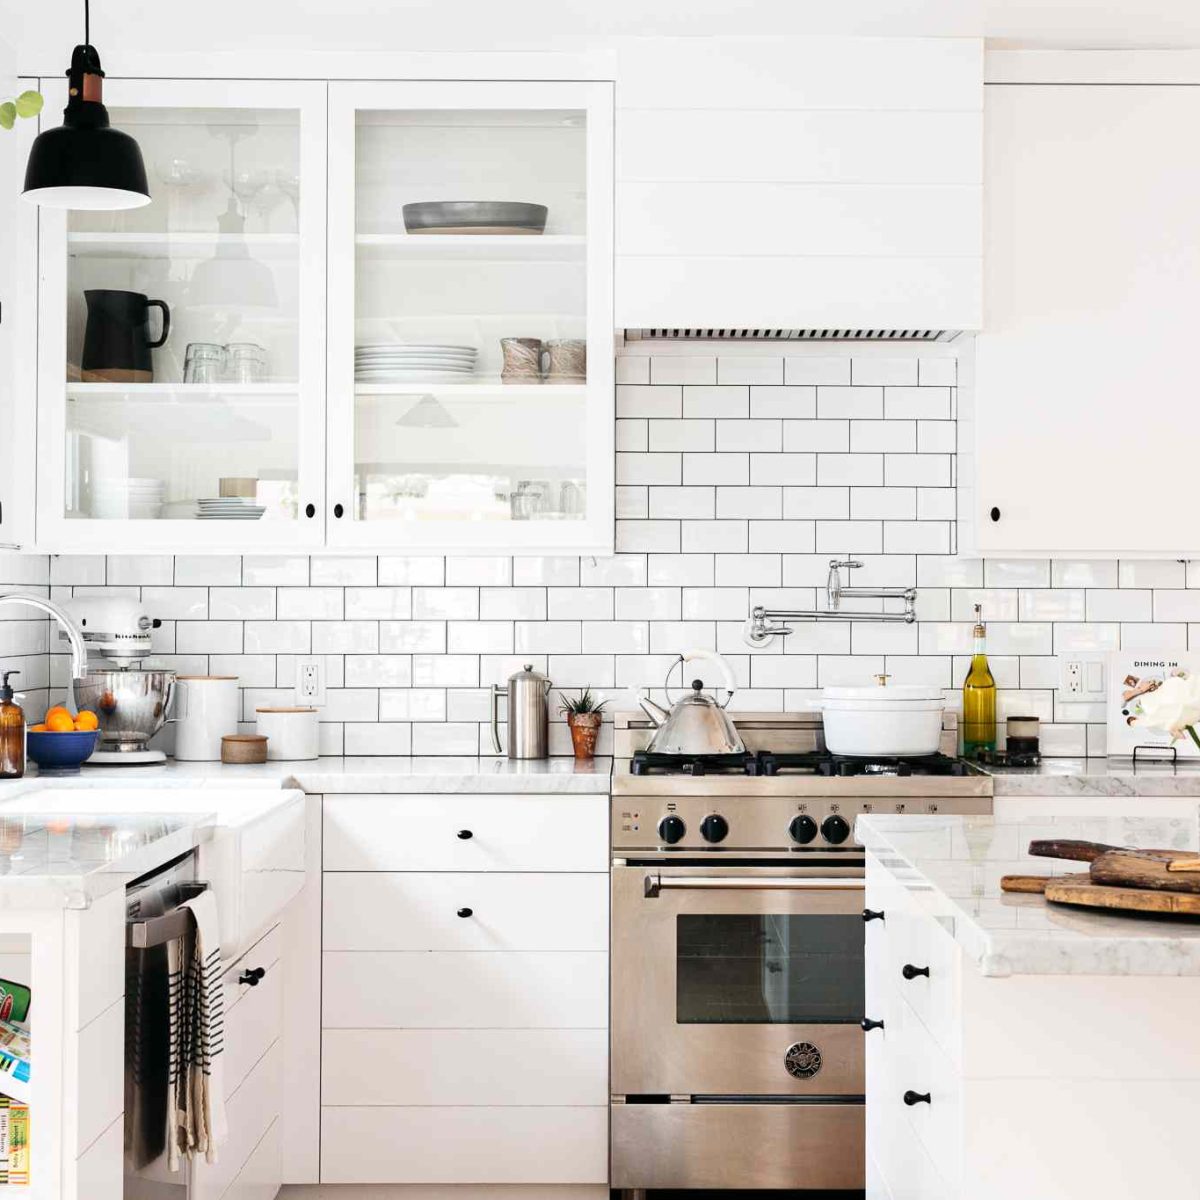 Best Backsplash Ideas For Kitchens With White Cabinets